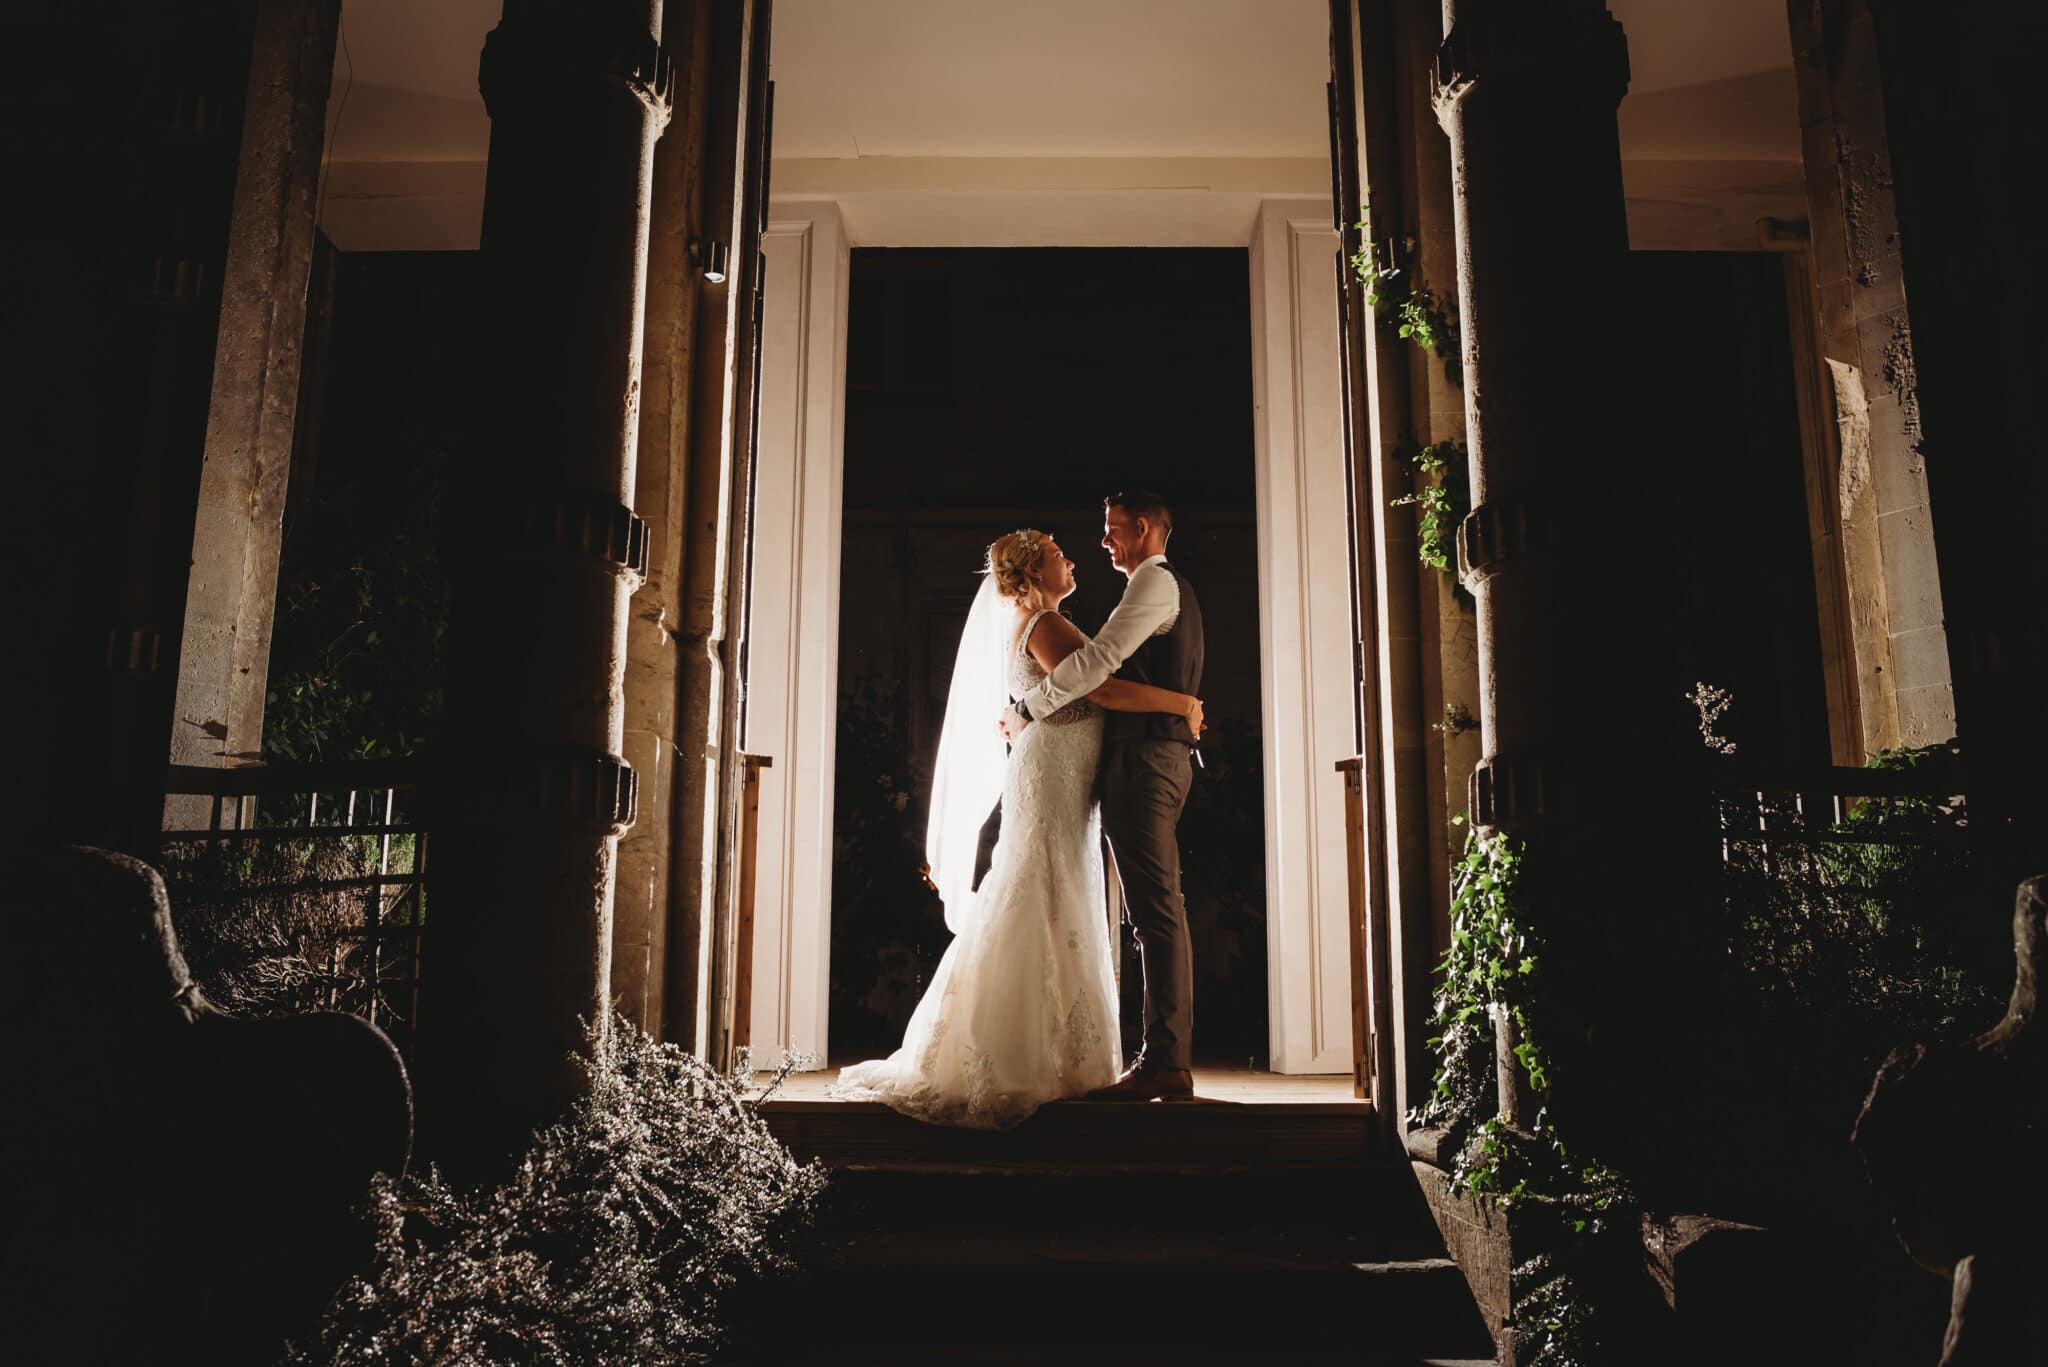 couple lit up at night at wedding venue orchardleigh house